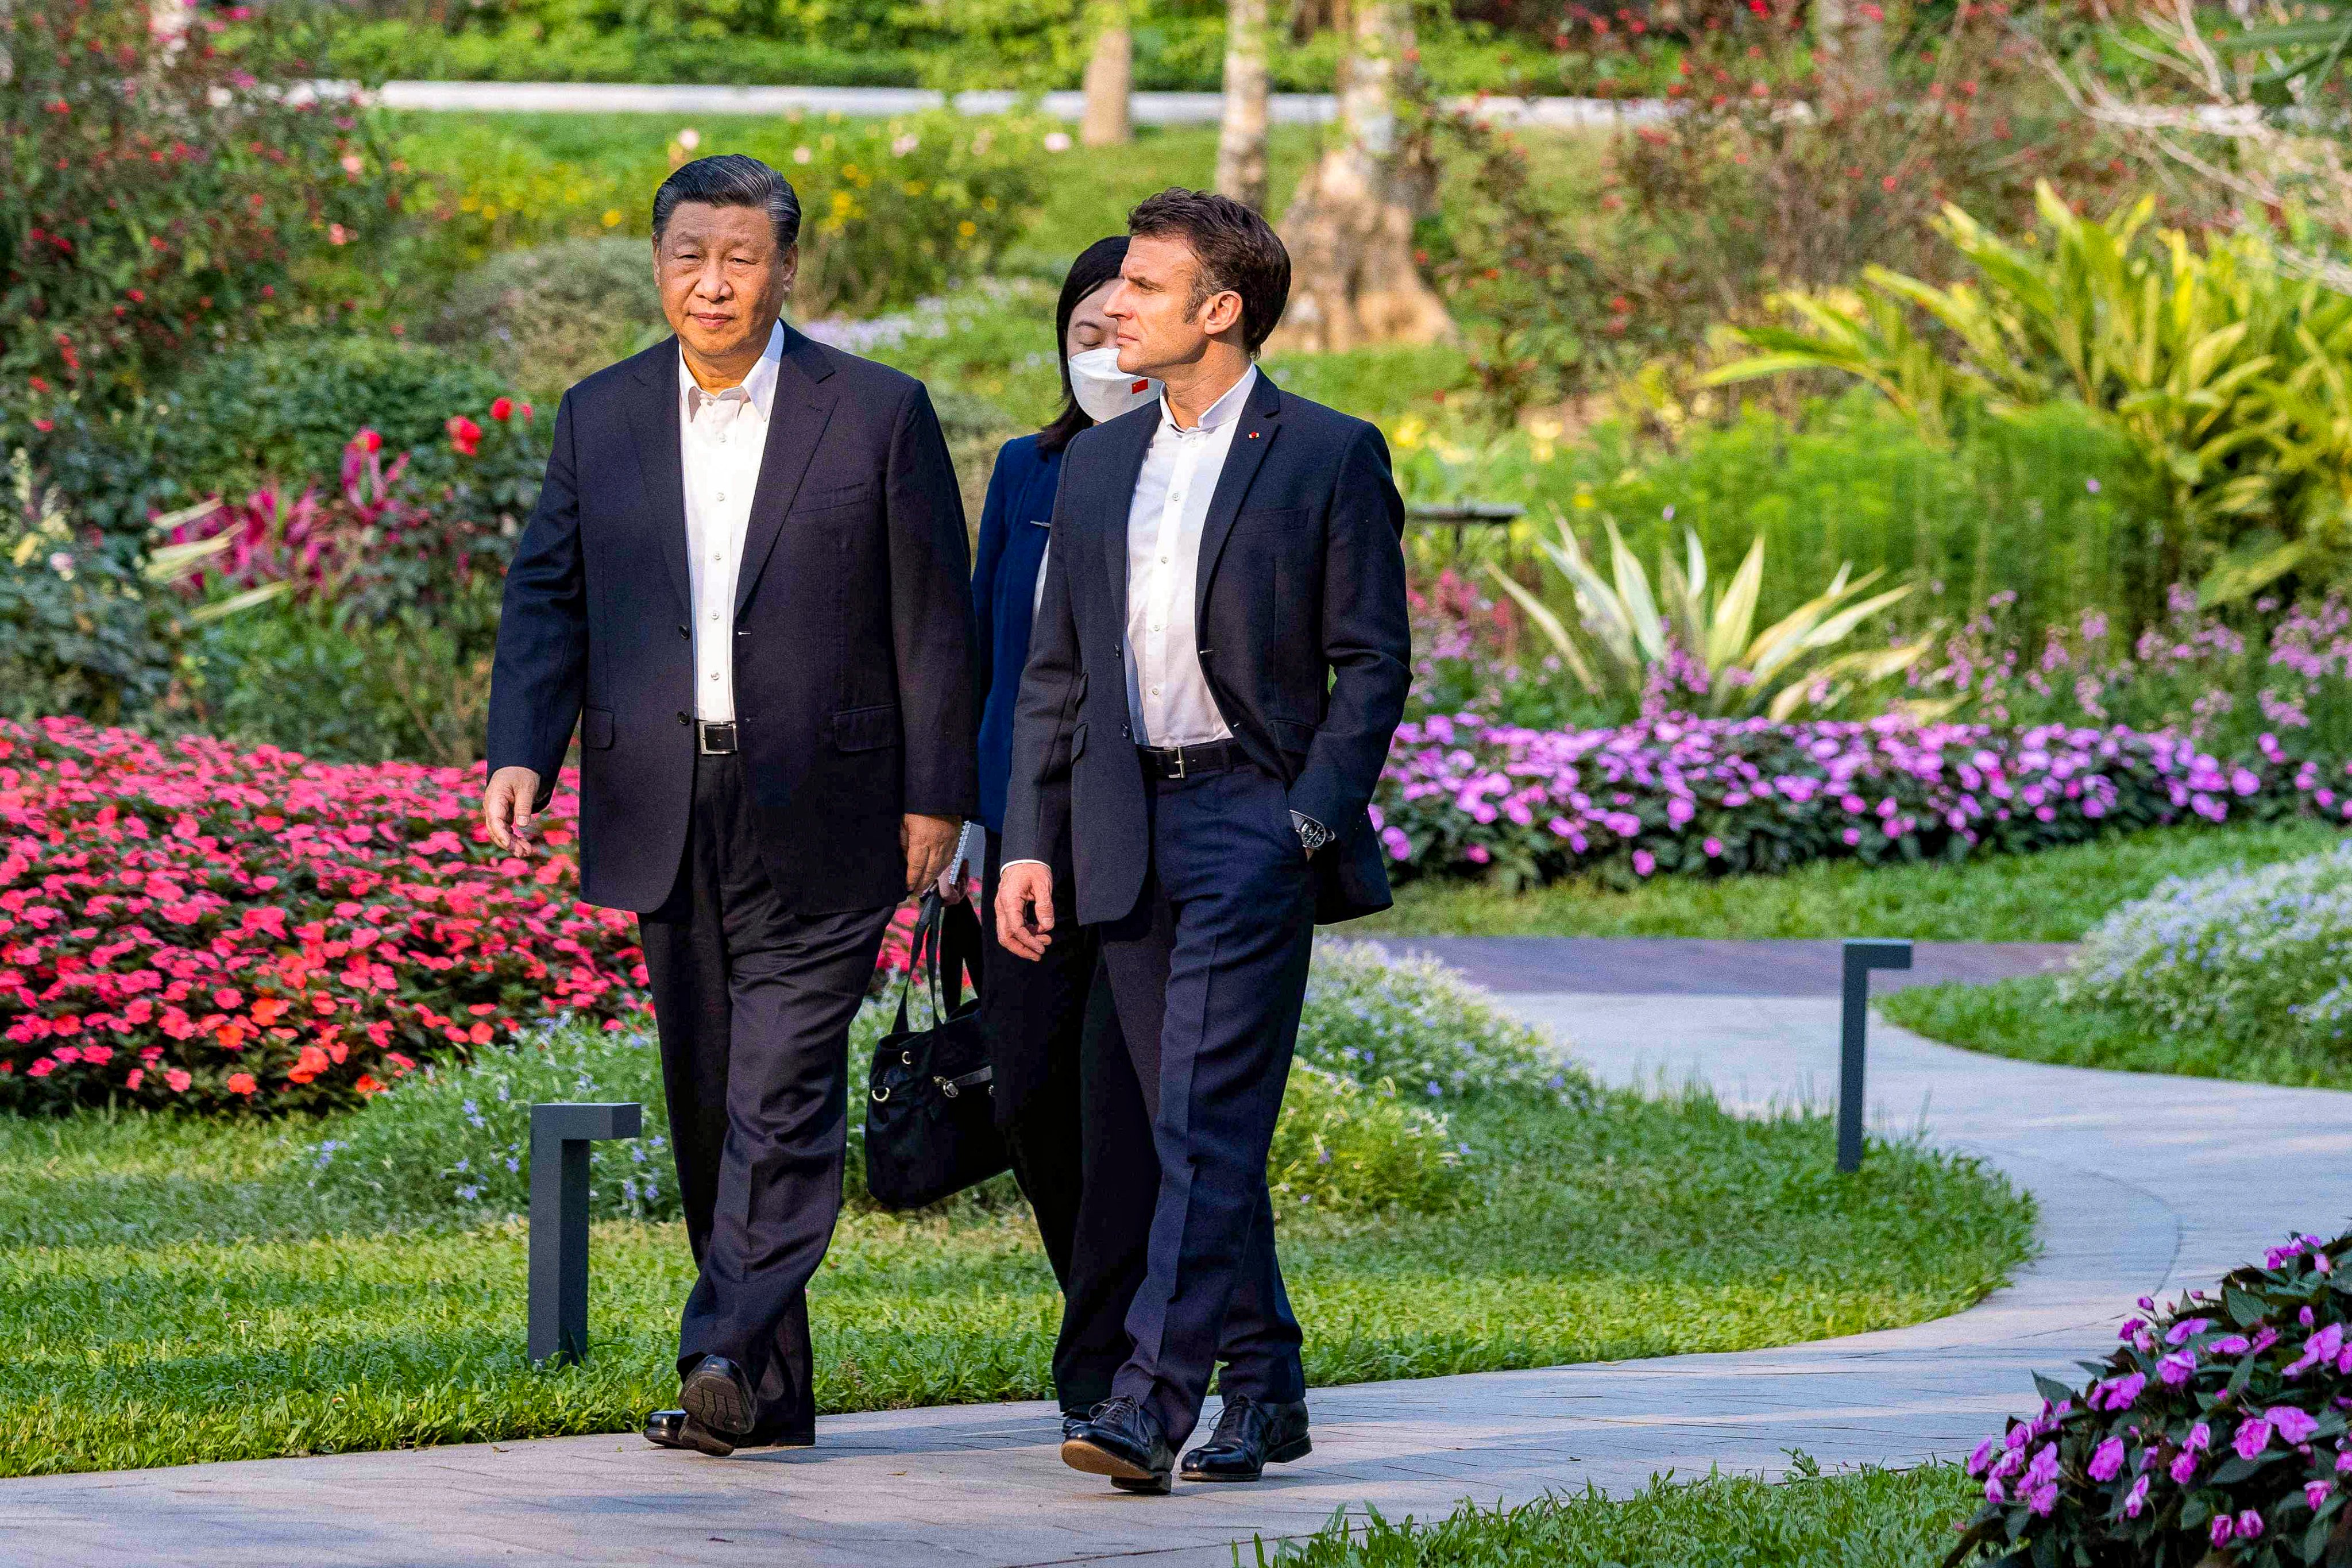 Chinese President Xi Jinping and French President Emmanuel Macron in Guangdong province on Friday. Photo: AFP